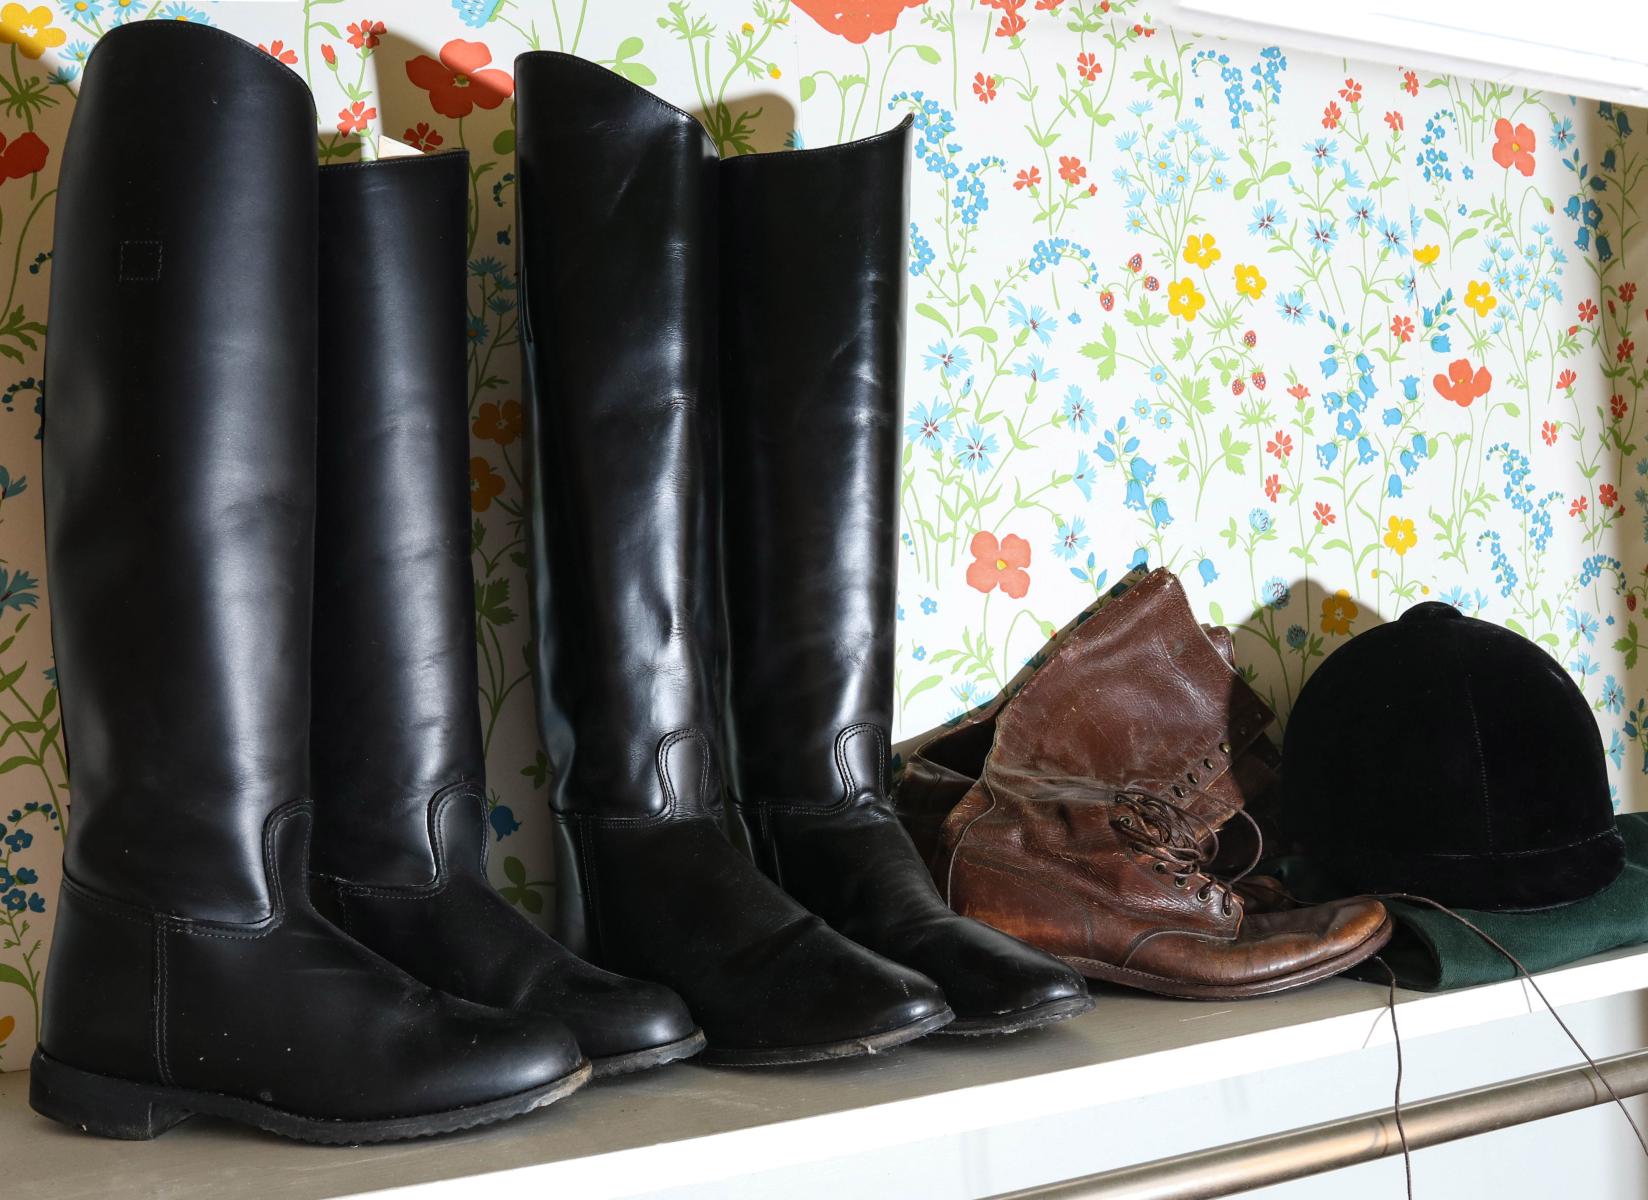 CLASSIC BLACK RIDING BOOTS AND RELATED ITEMS